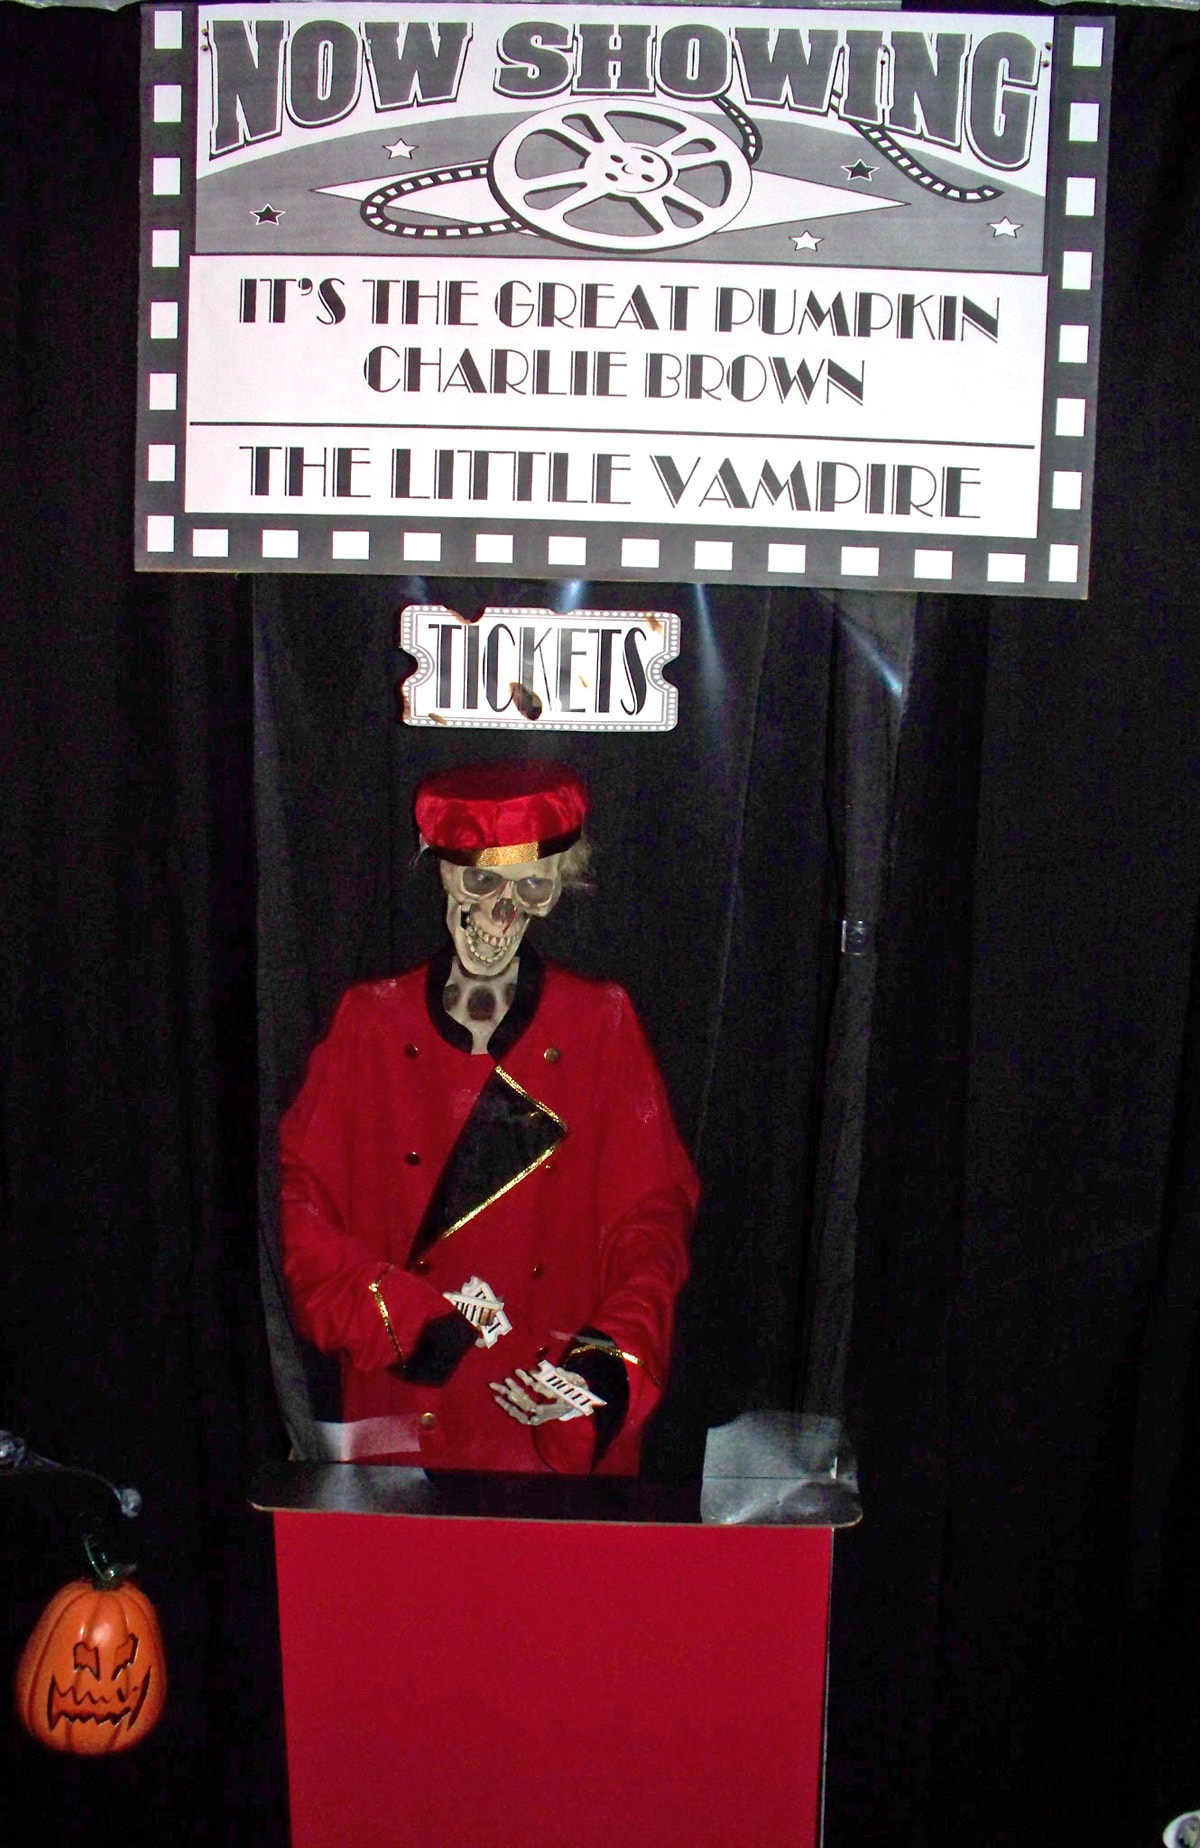 Halloween movie theater ticket book with a skeleton ticket taker.